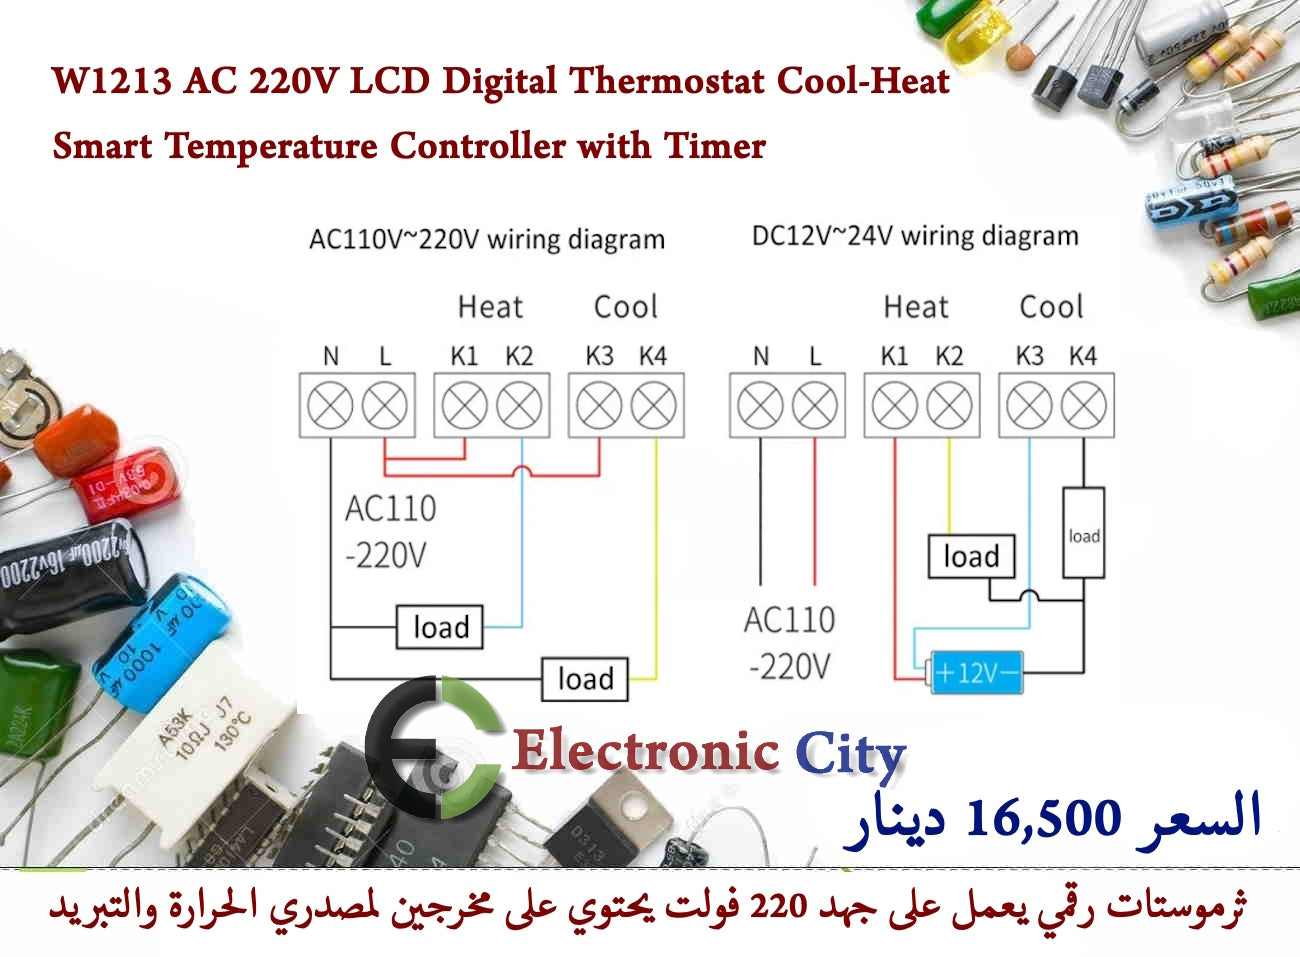 W1213 AC 220V LCD Digital Thermostat Cool-Heat Smart Temperature Controller with Timer  #KK